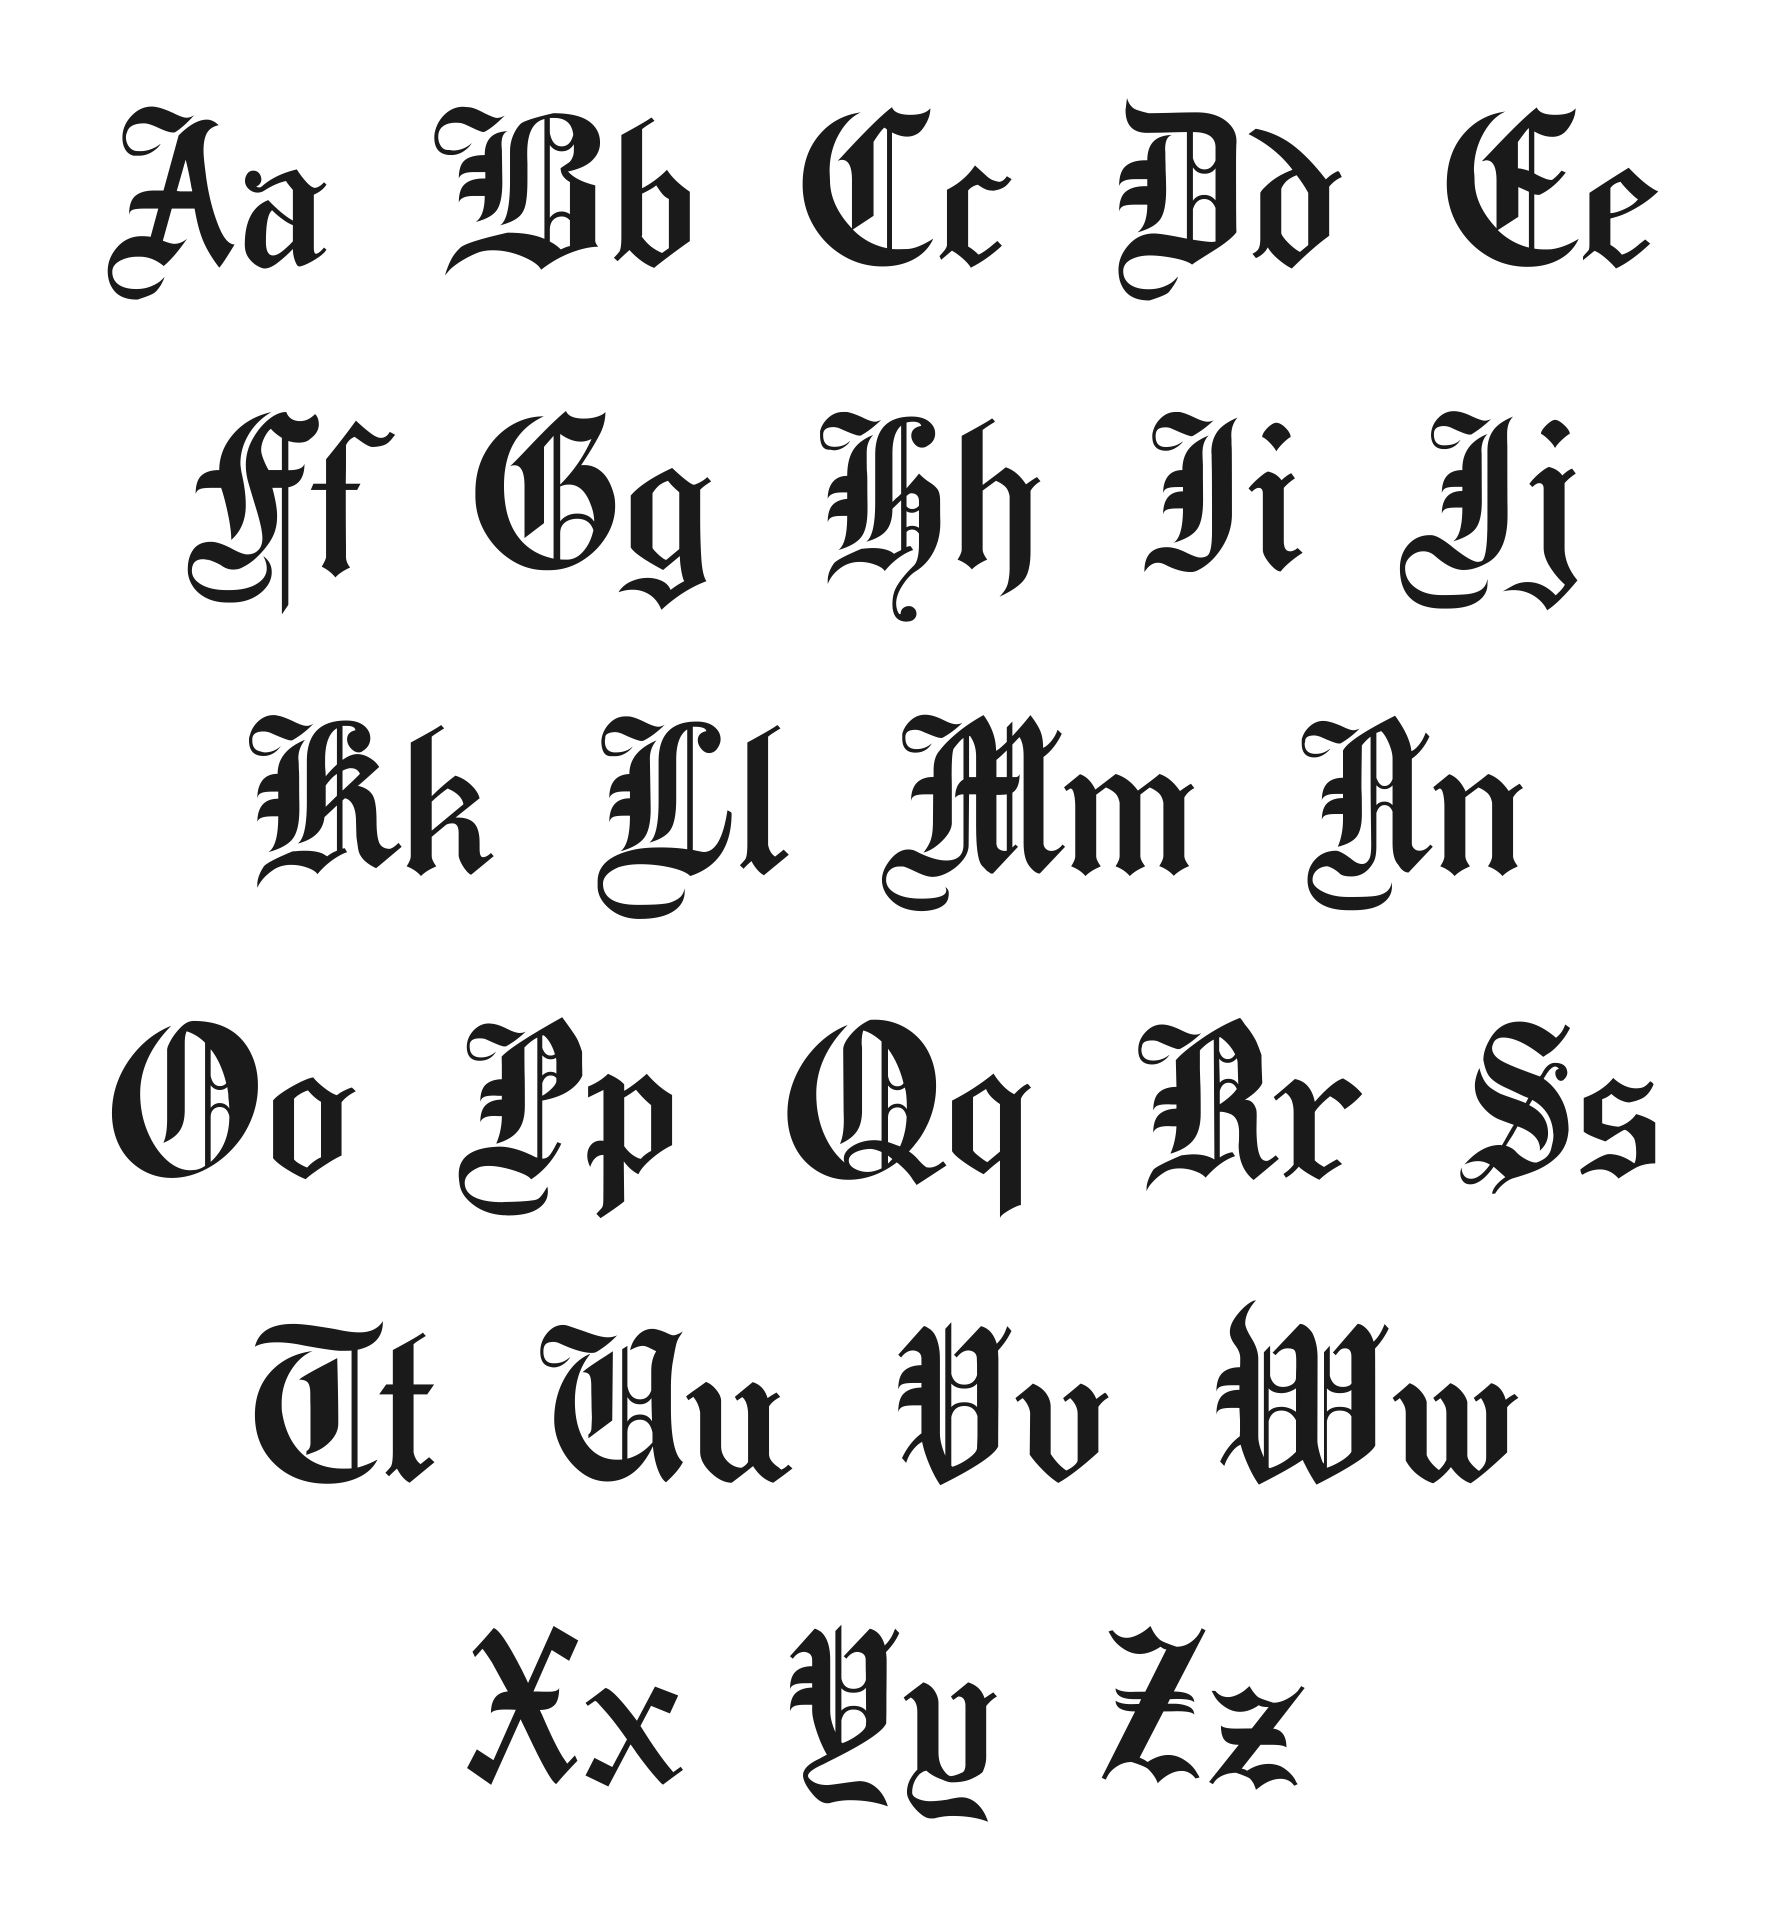 5 best images of printable old english alphabet a z - 5 best images of